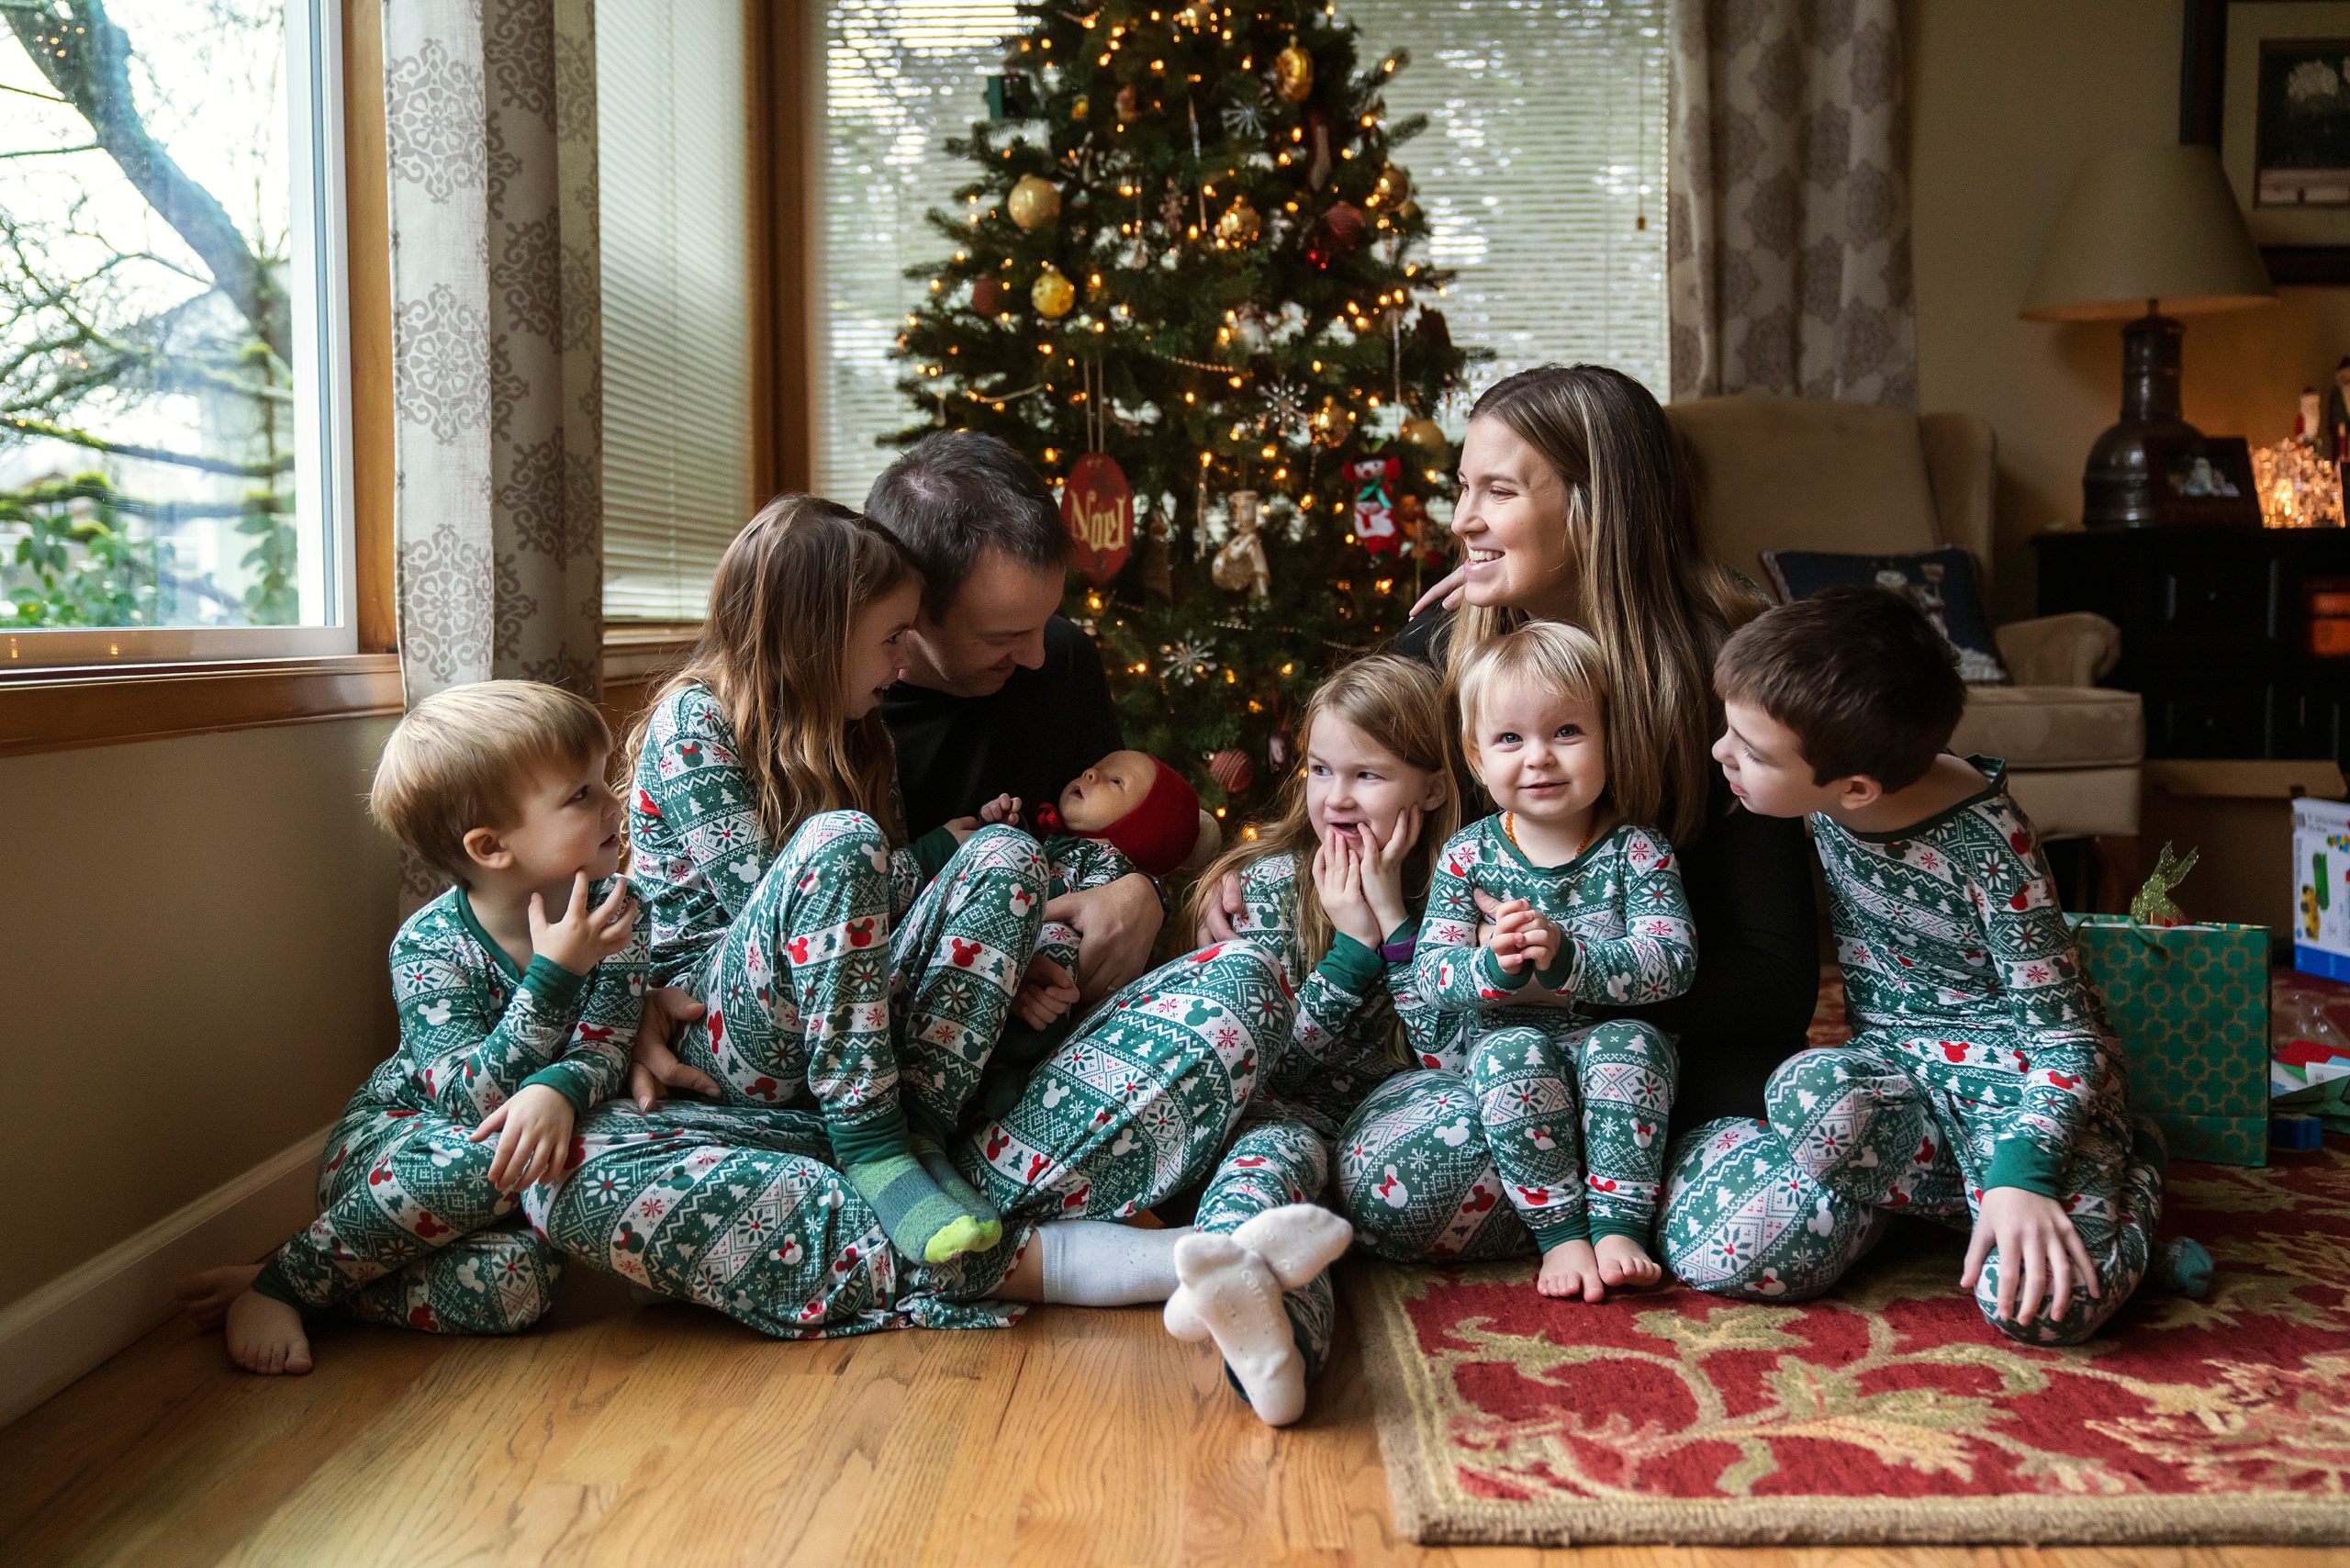 Christmas tradition of family of 8 in matching Christmas pjs